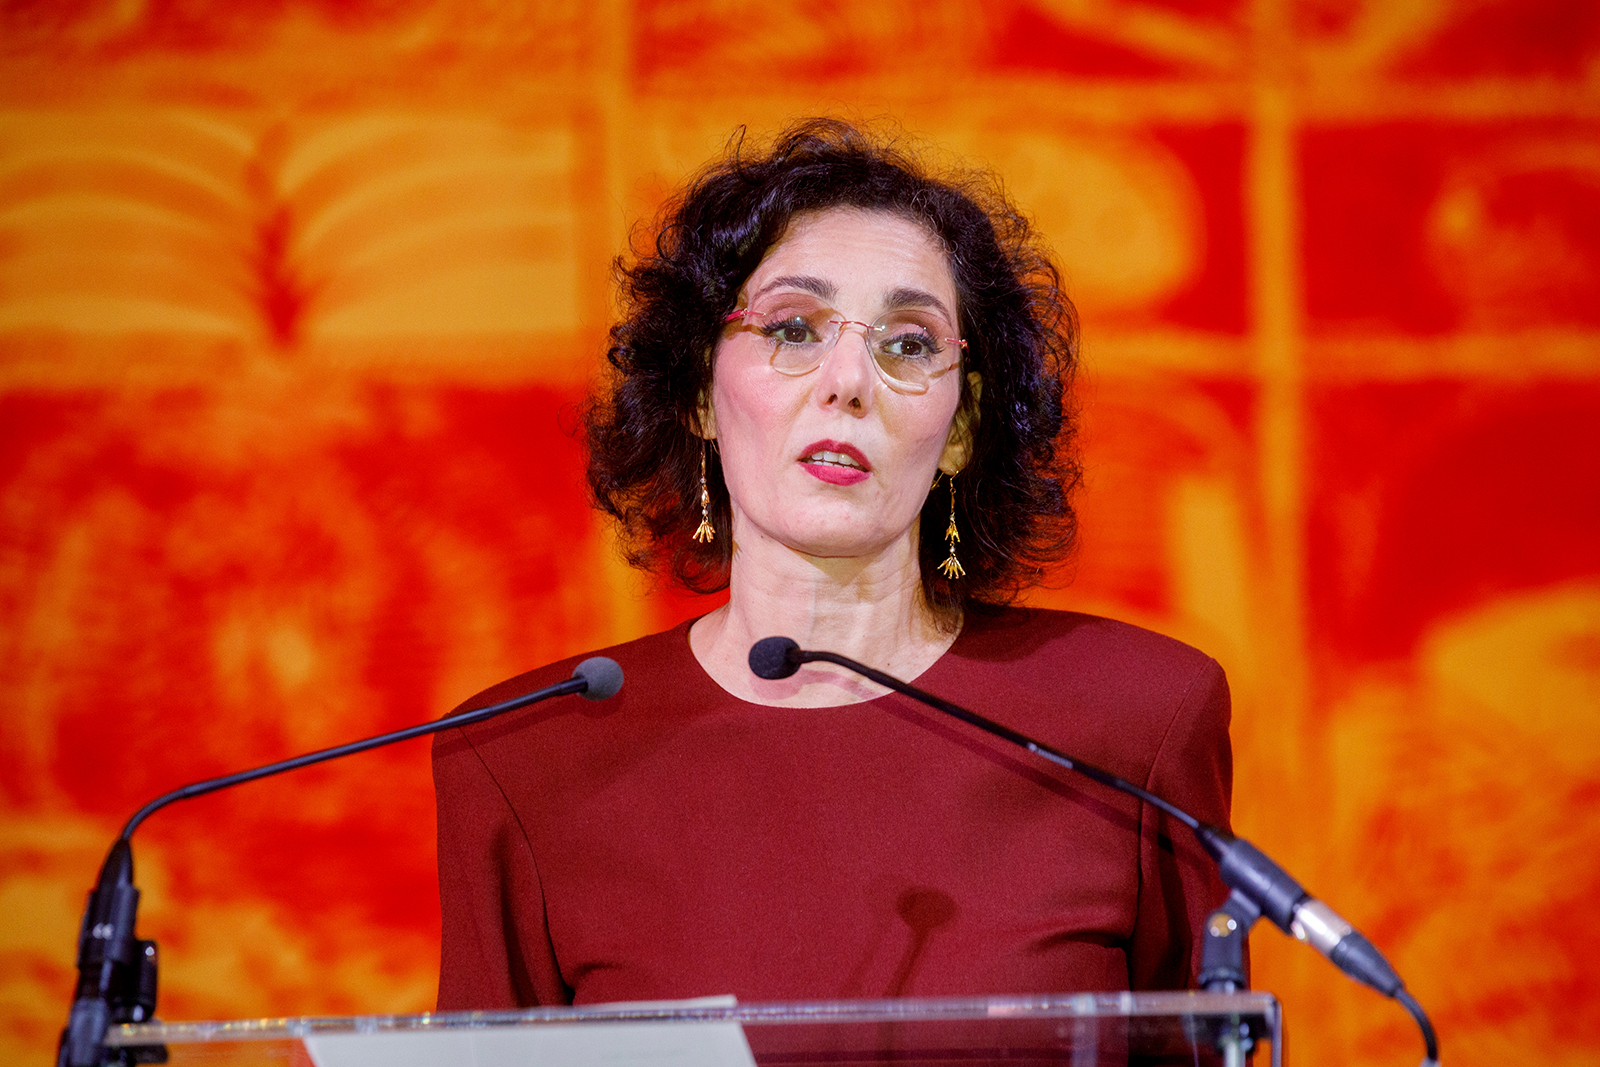 Hadja Lahbib attends an event in Brussels, Belgium on January 23.